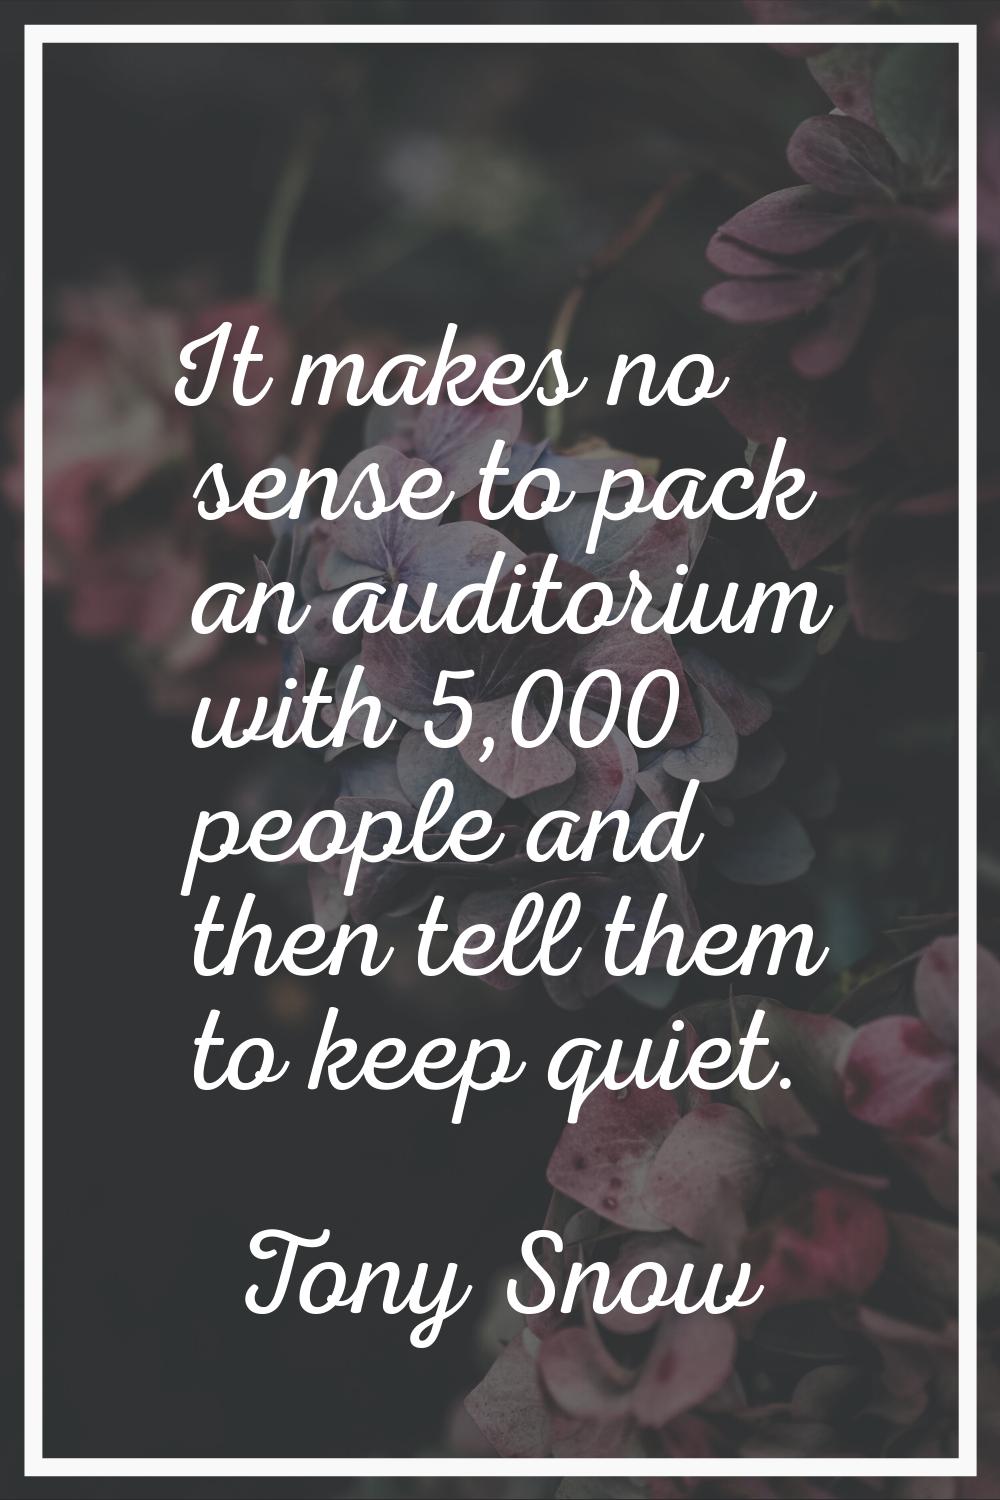 It makes no sense to pack an auditorium with 5,000 people and then tell them to keep quiet.